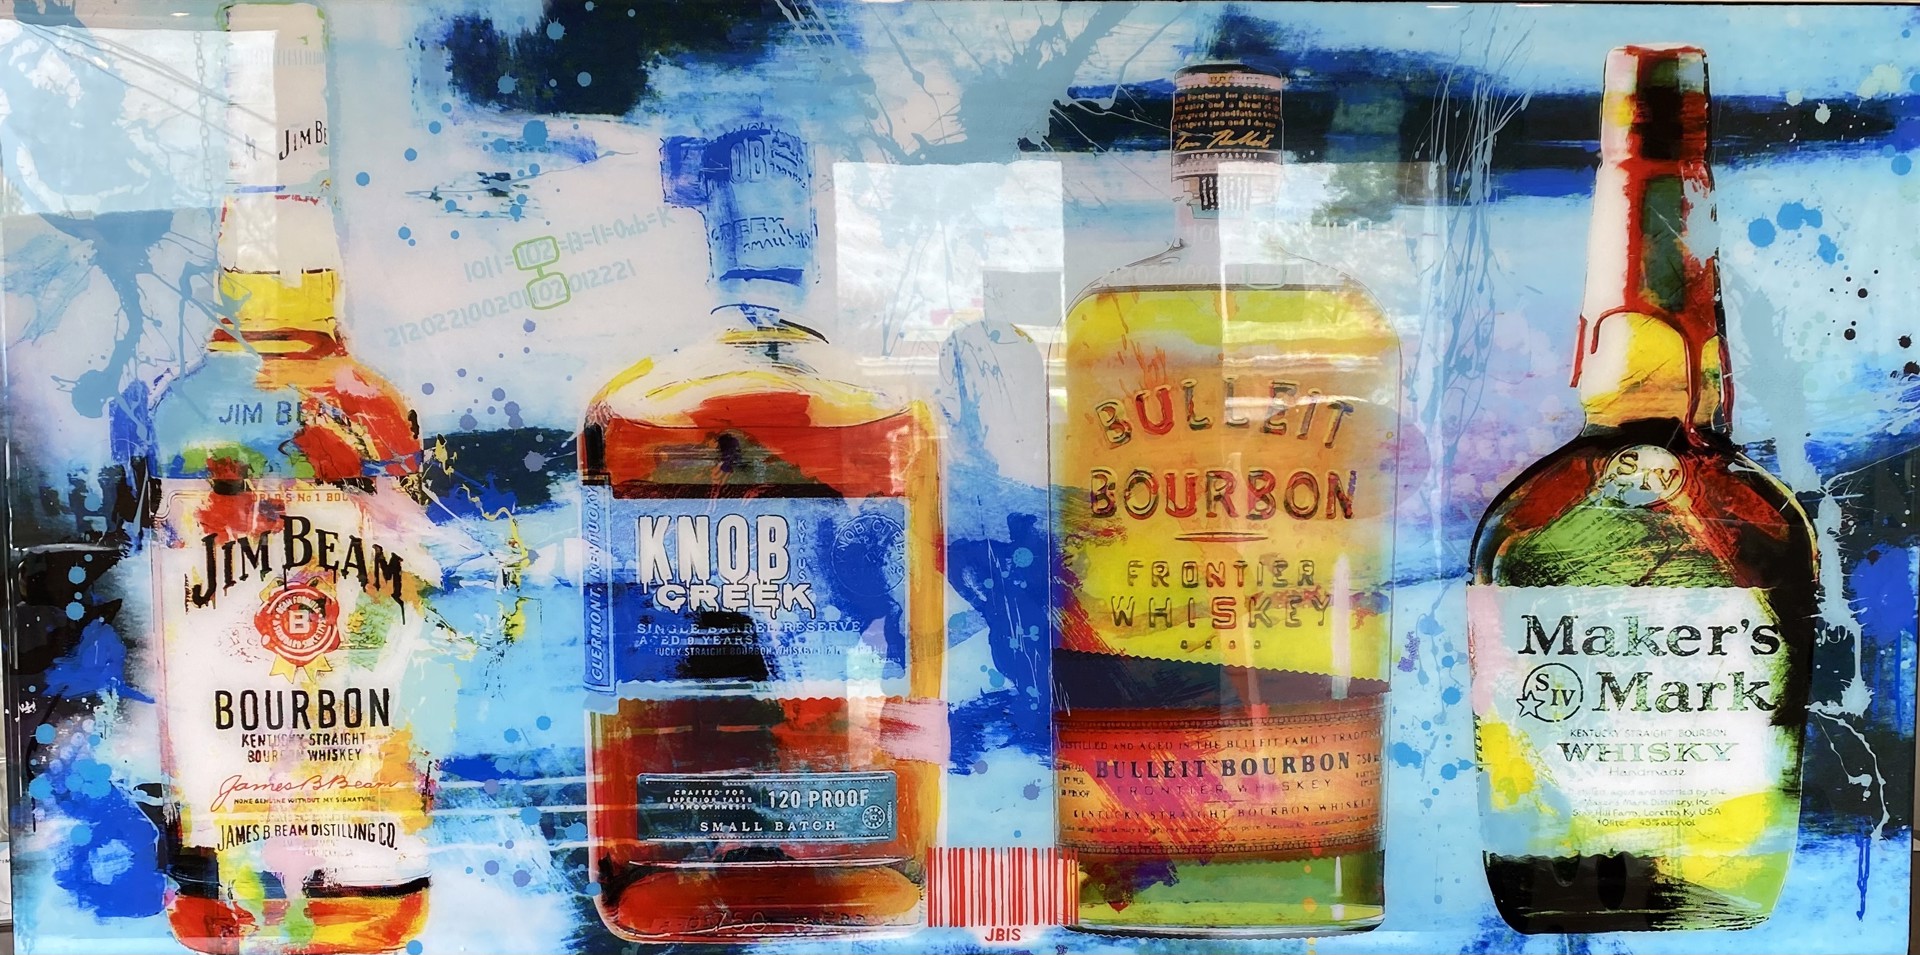 Bourbon Blues 2 by Bisaillon Brothers